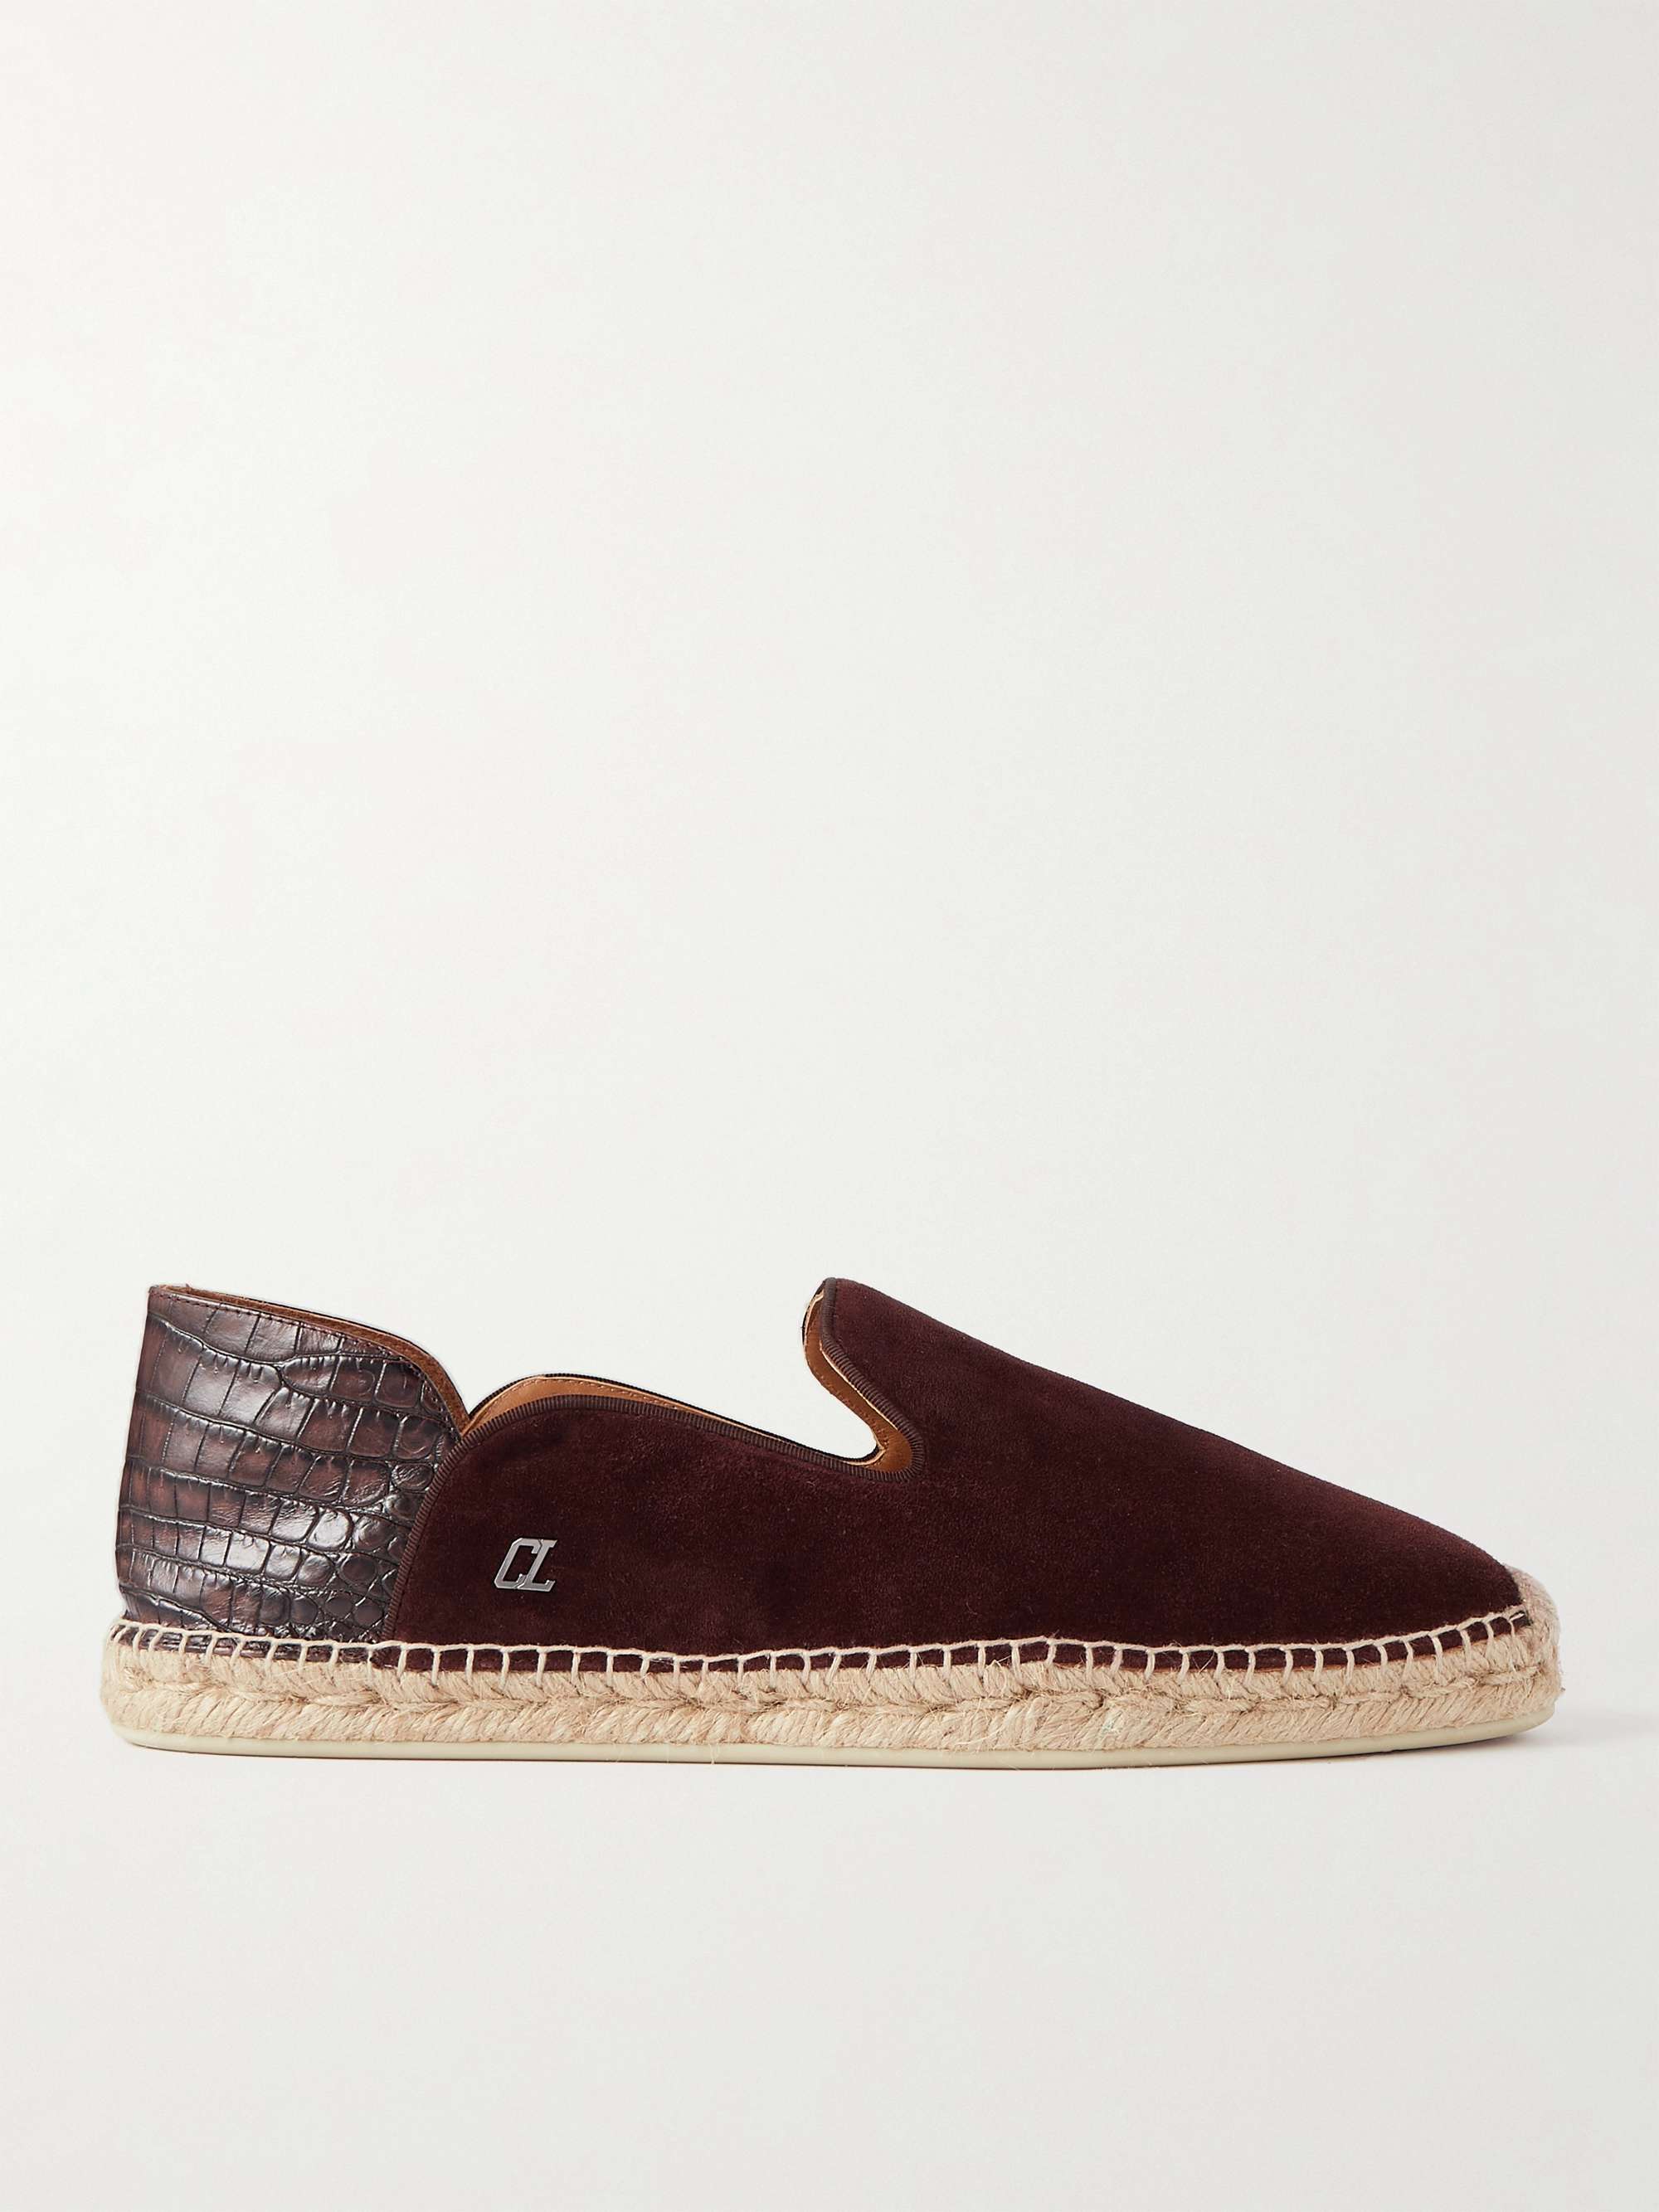 CHRISTIAN LOUBOUTIN Espadron Croc-Effect Leather-Trimmed Collapsible-Heel Suede Espadrilles